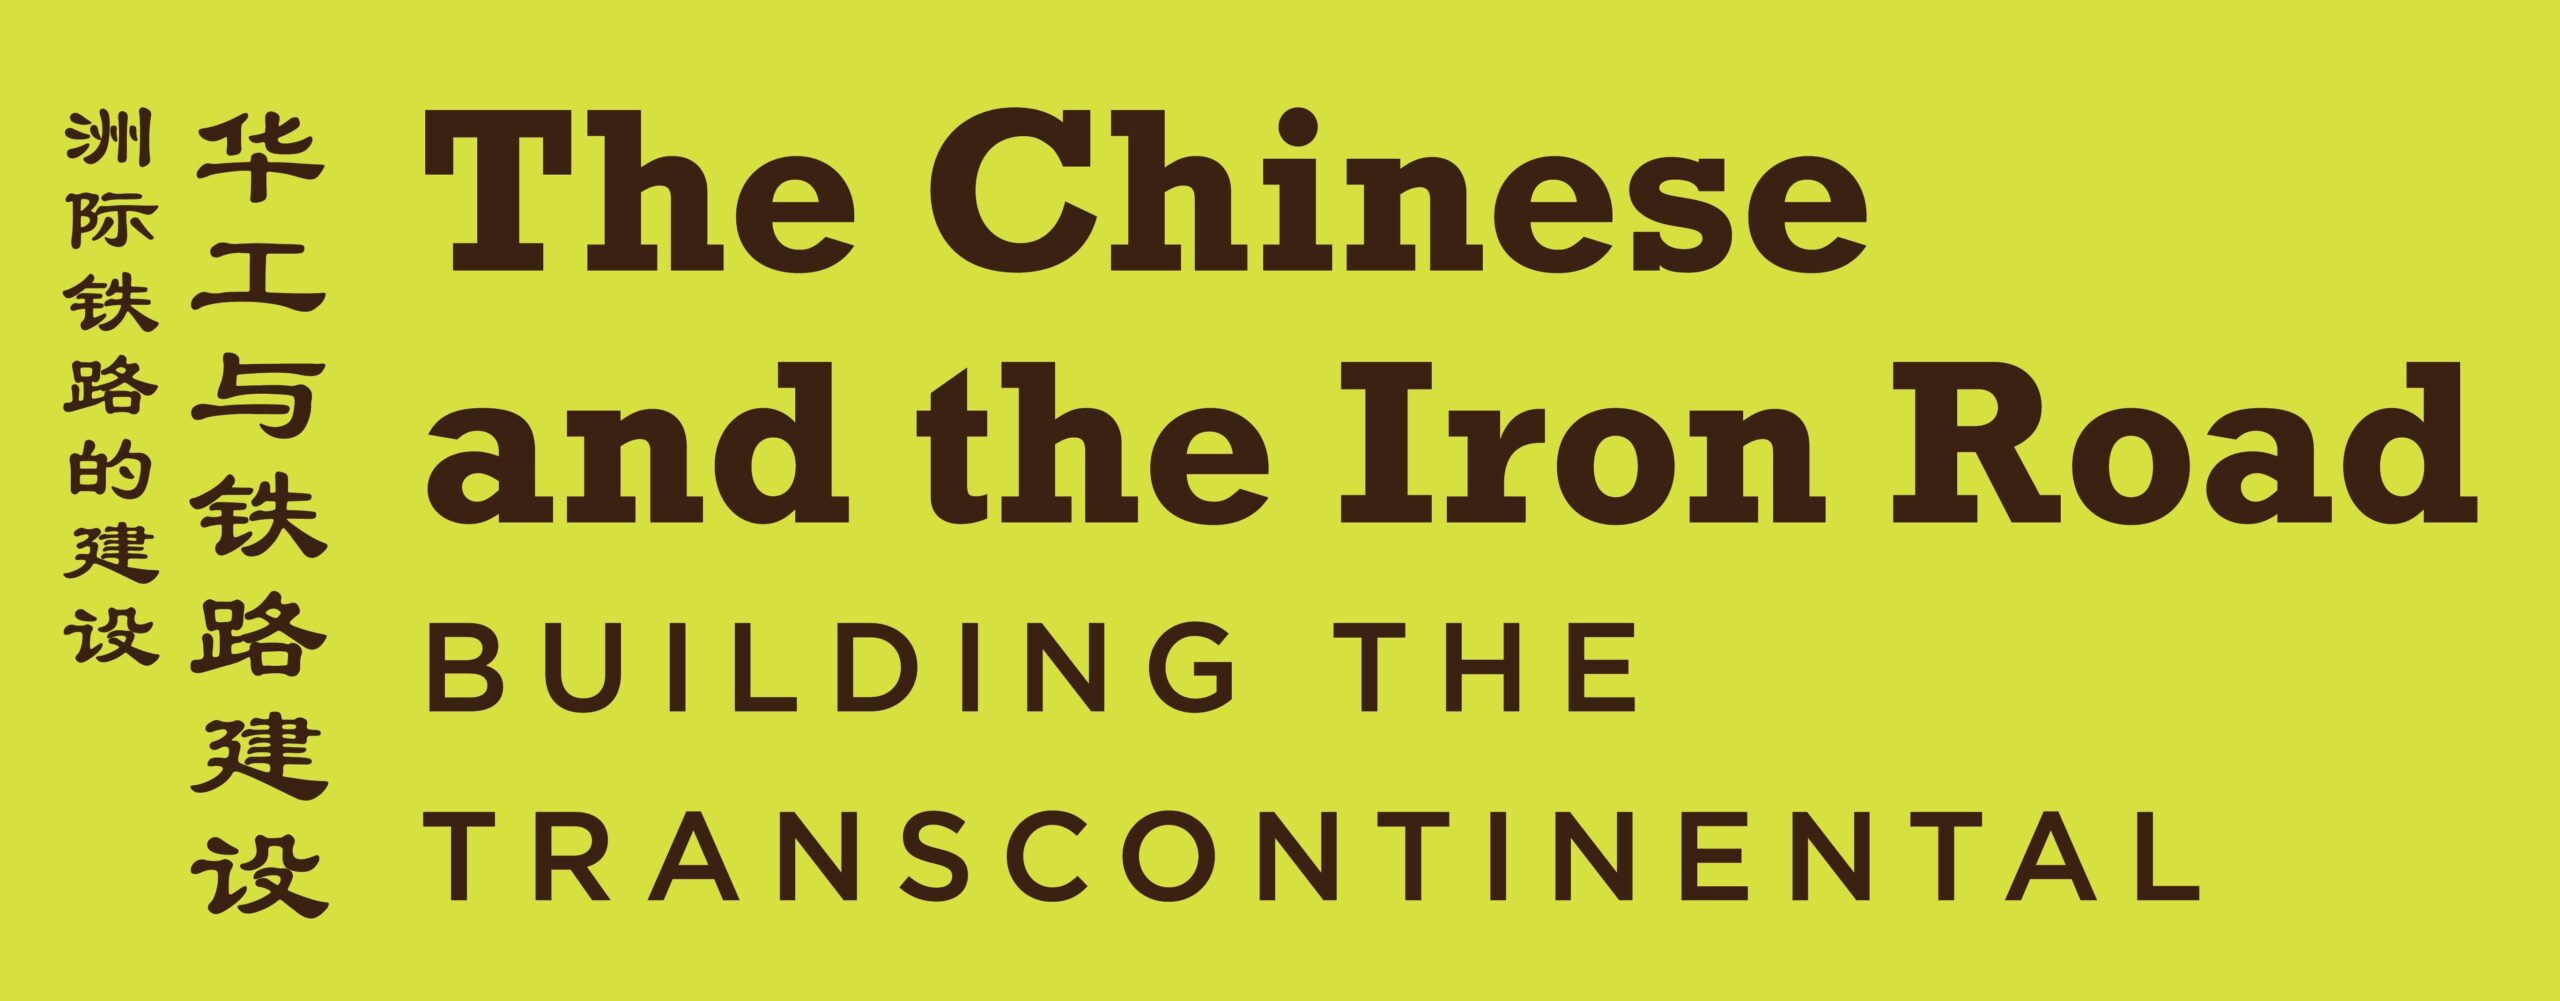 Chinese and the Iron Road Flyer Logo